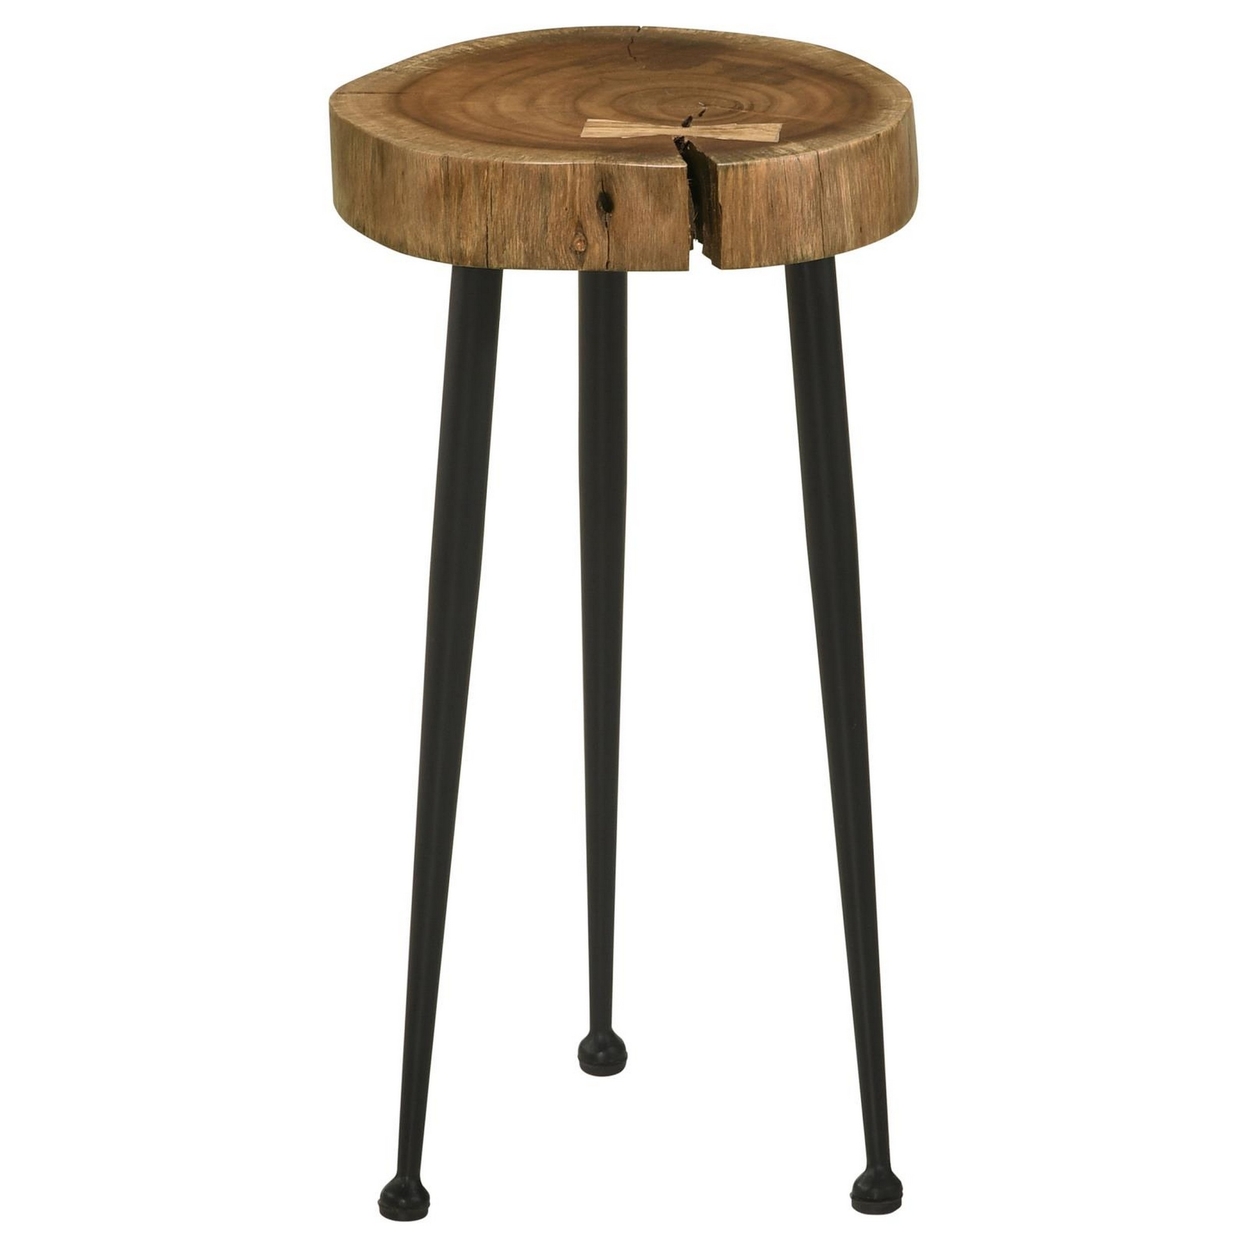 22 Inch Side Table, Iron Tapered Legs, Live Edge Acacia Wood, Natural Brown -Saltoro Sherpi